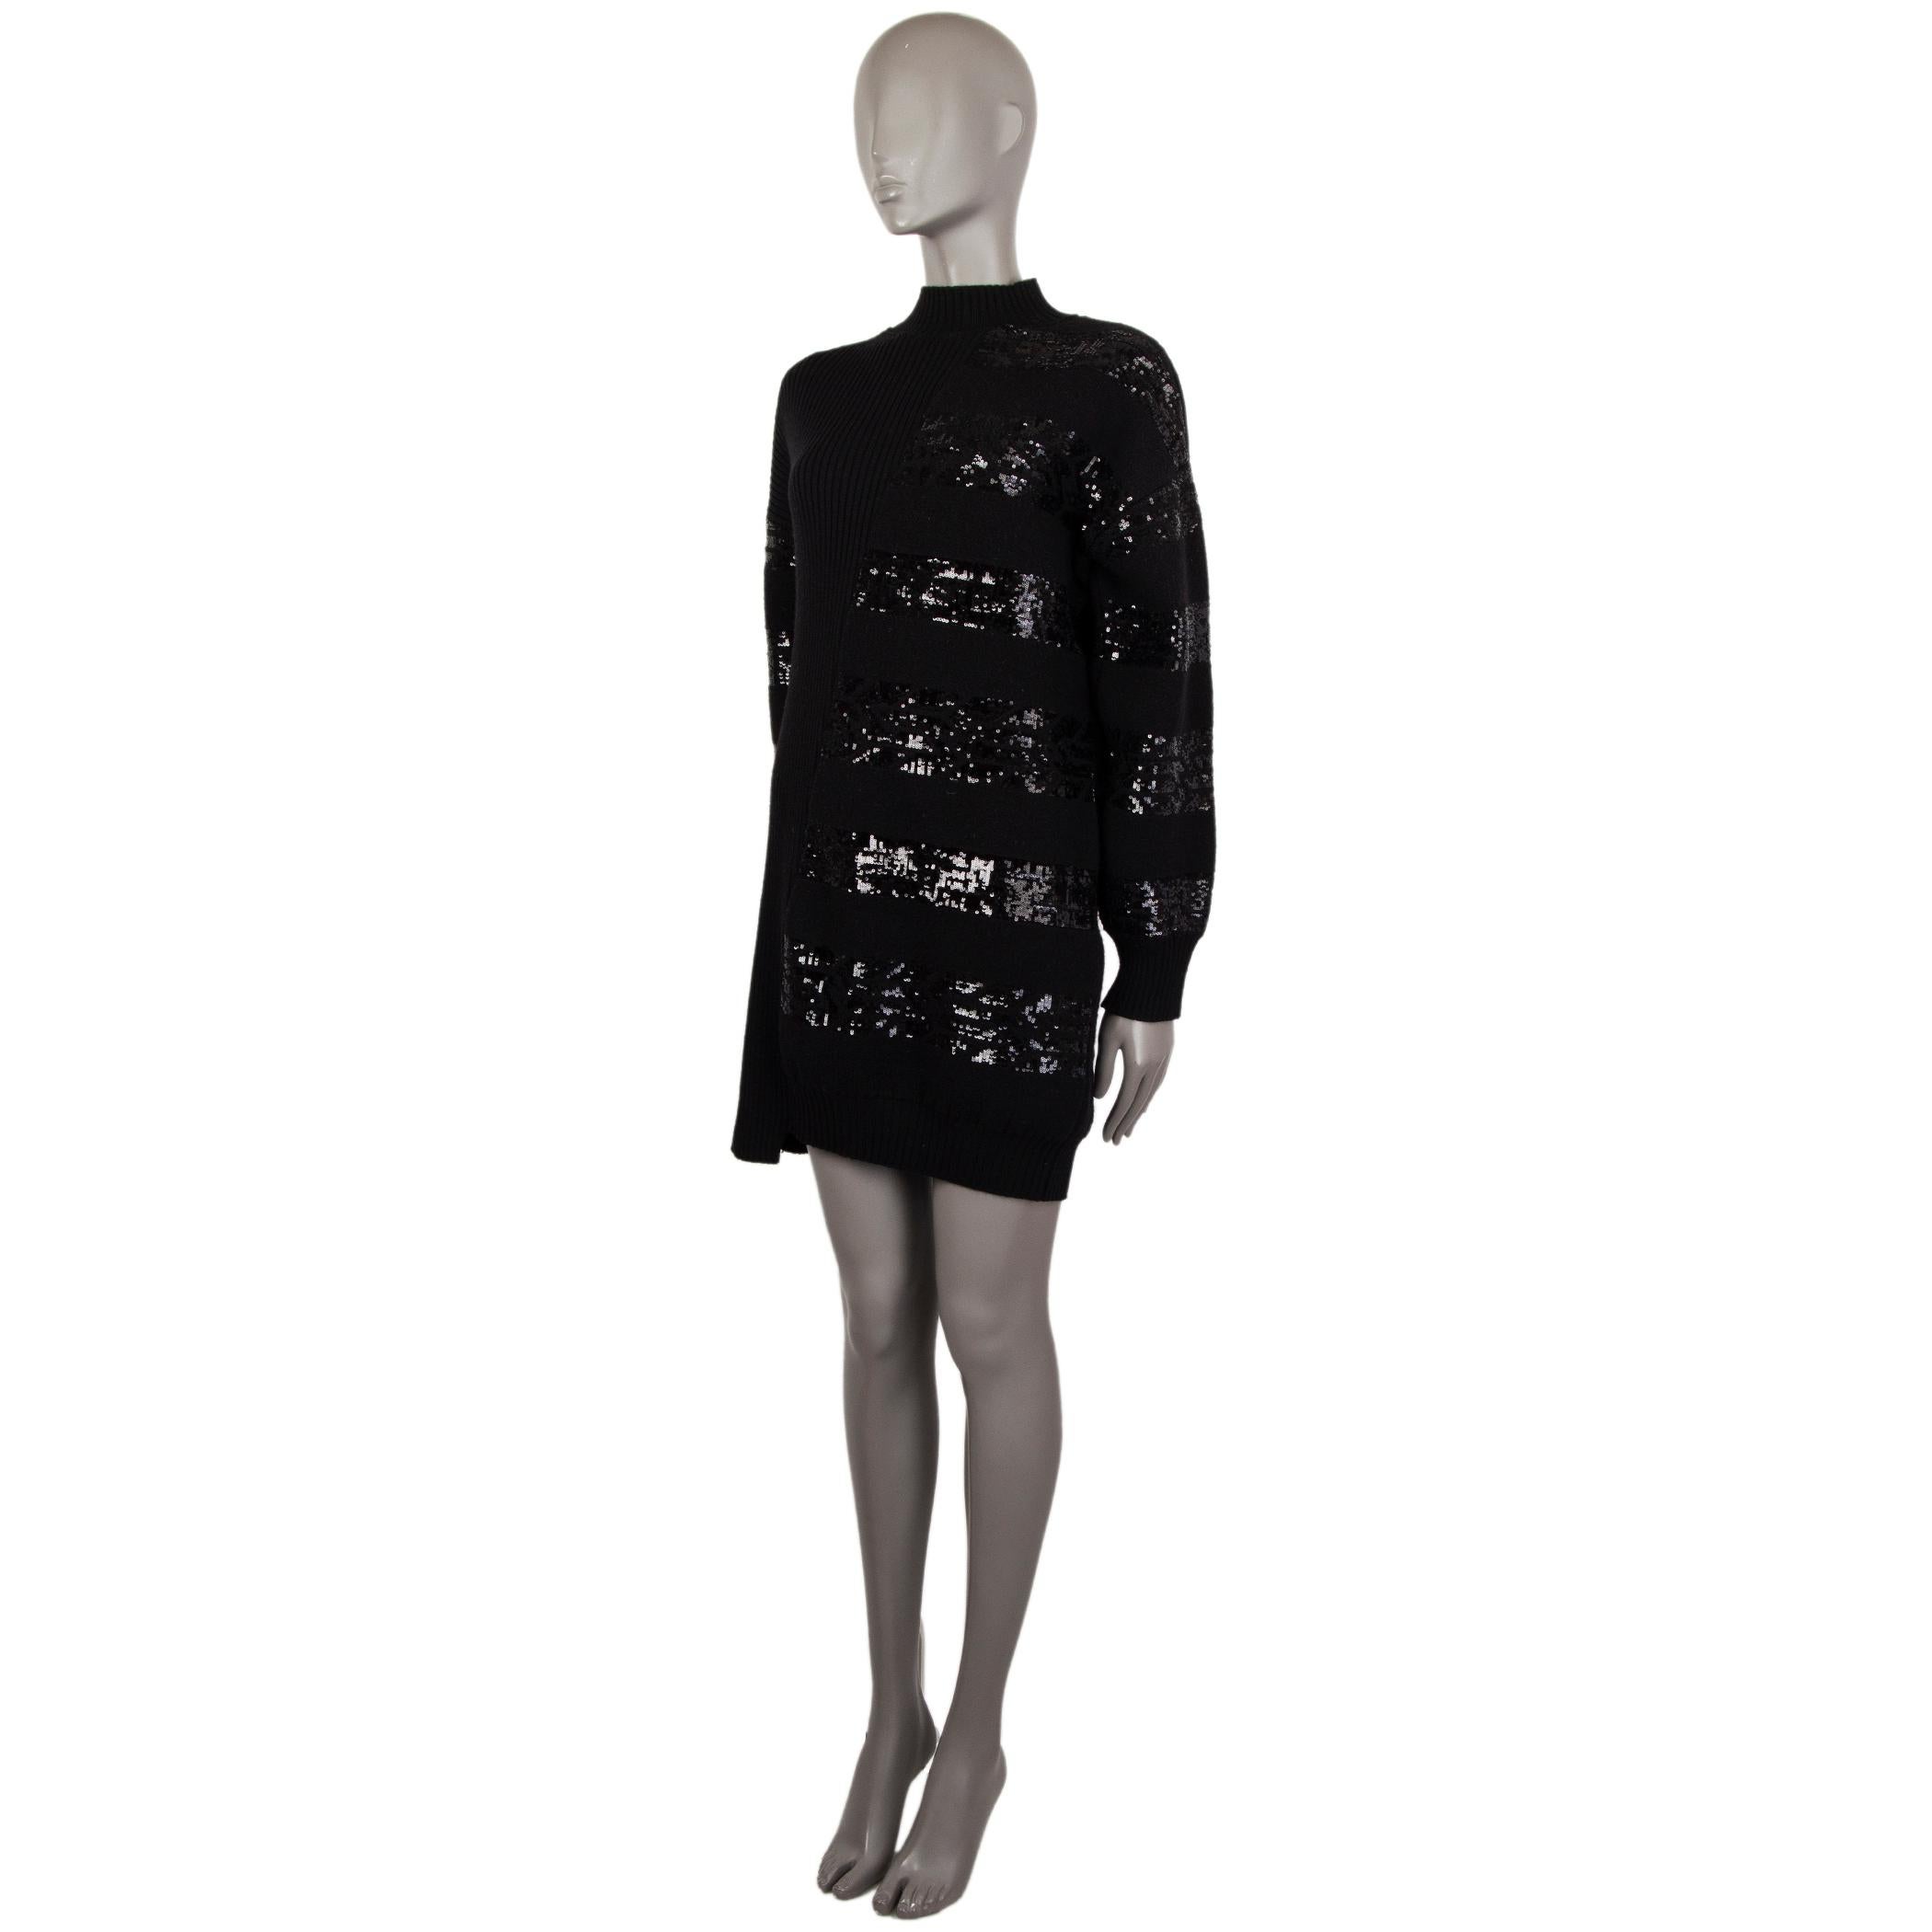 Louis Vuitton ribbed-knit sweater dress in black wool (81%), viscose (15%), and nylon (4%). With mock neck and sequins embellsihments. Unlined. Has been worn and is in excellent condition.

ag Size M
Size M
Shoulder Width 57cm (22.2in)
Bust 120cm